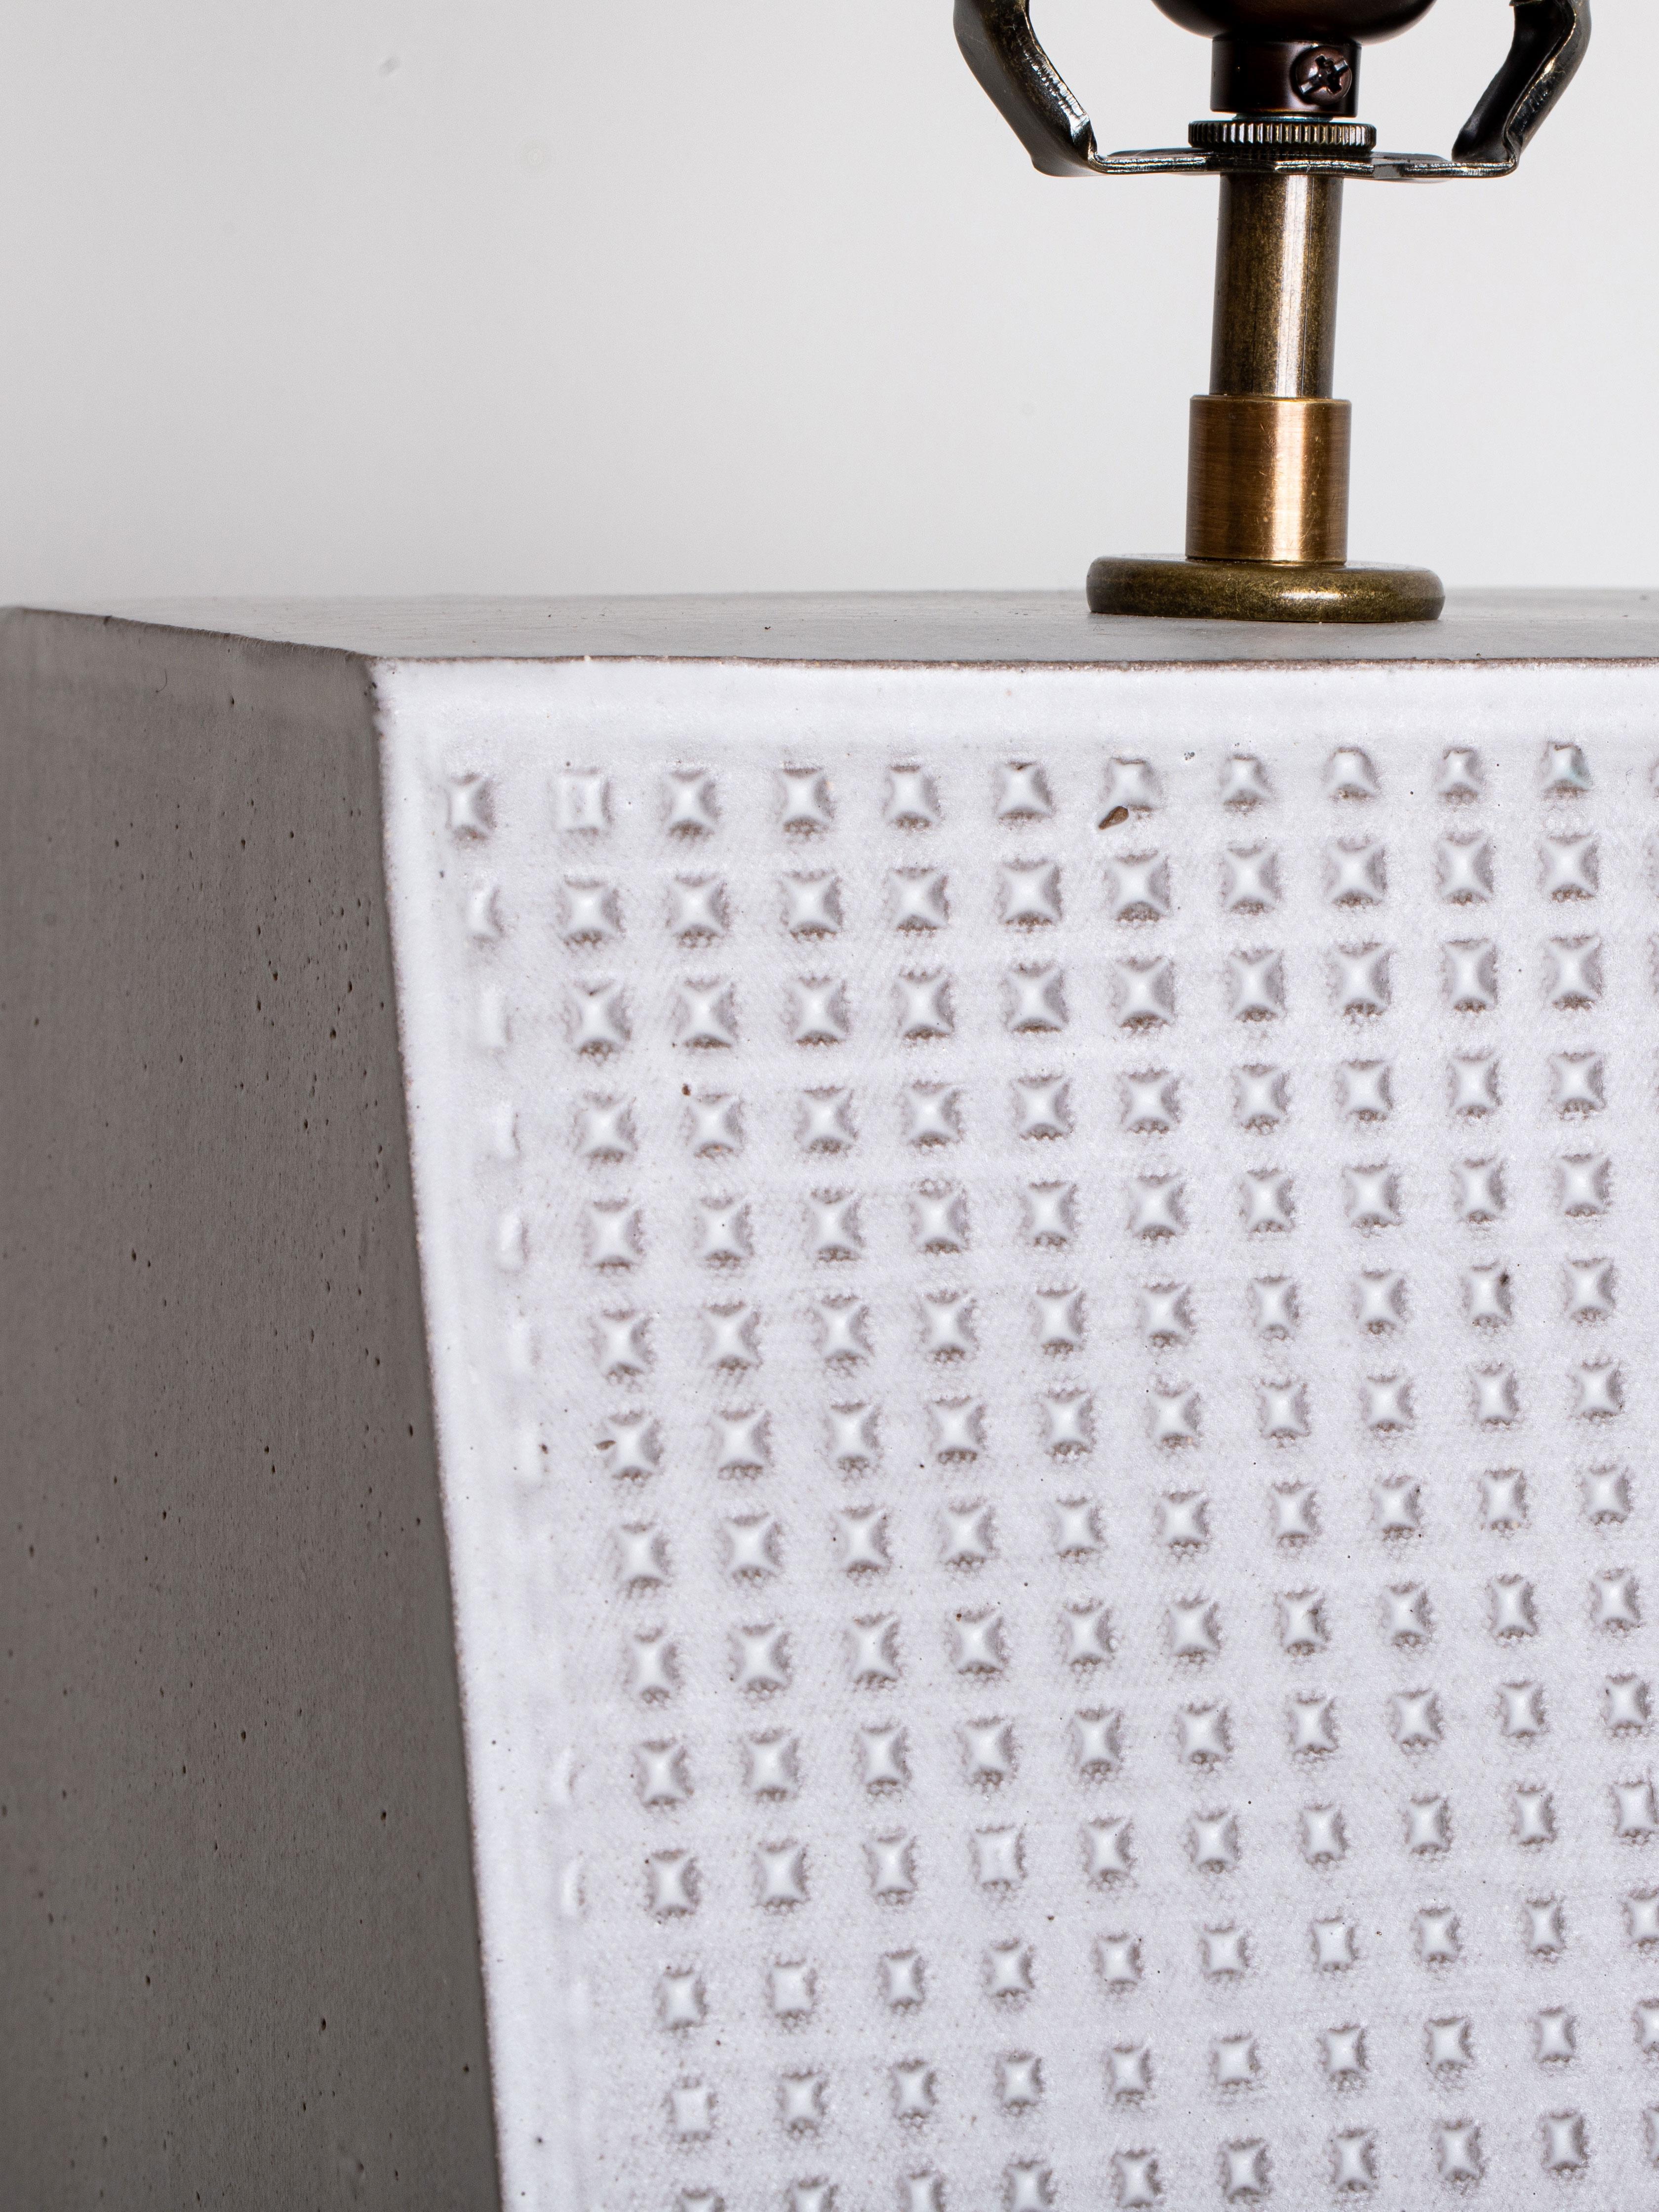 Our stoneware Grace Lamp is
handcrafted using slab-construction
techniques. The lamp’s pattern is created by rolling the surface with textured rolling pins and rods.

FINISH

- Dipped glaze, pictured in chalk 
- Antique brass fittings
-